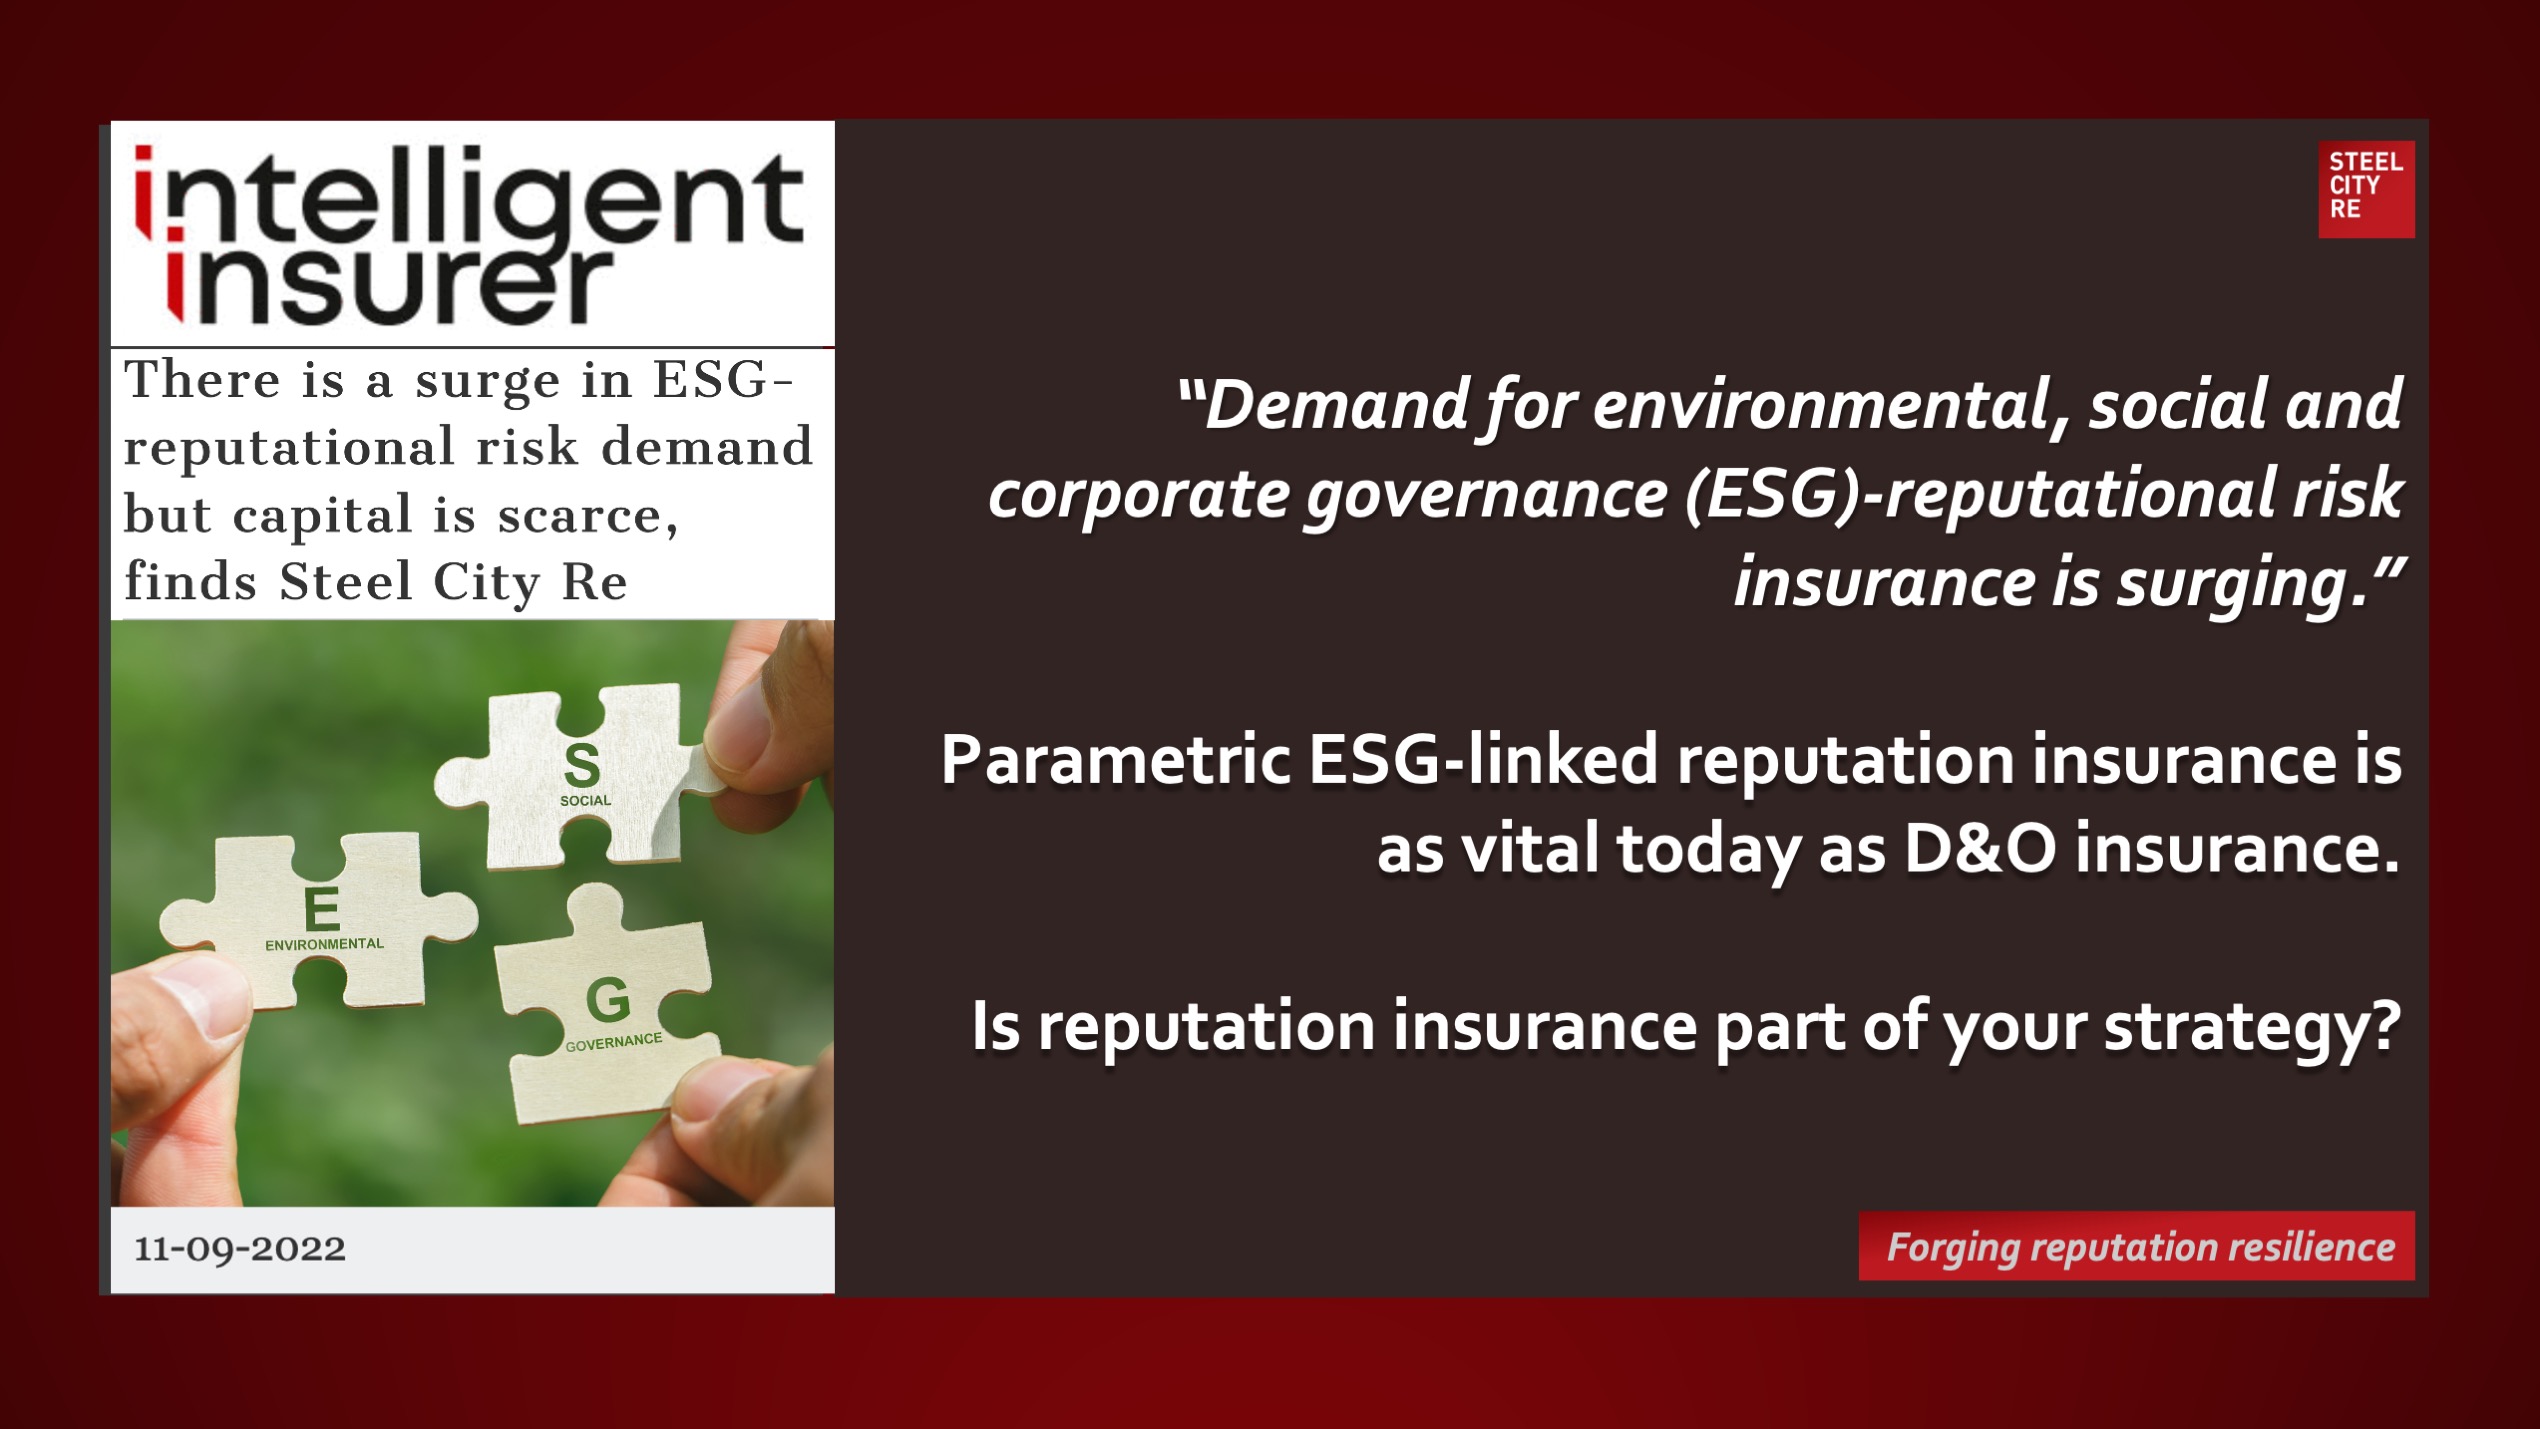 “Demand for environmental, social and corporate governance (ESG)-reputational risk insurance is surging.”